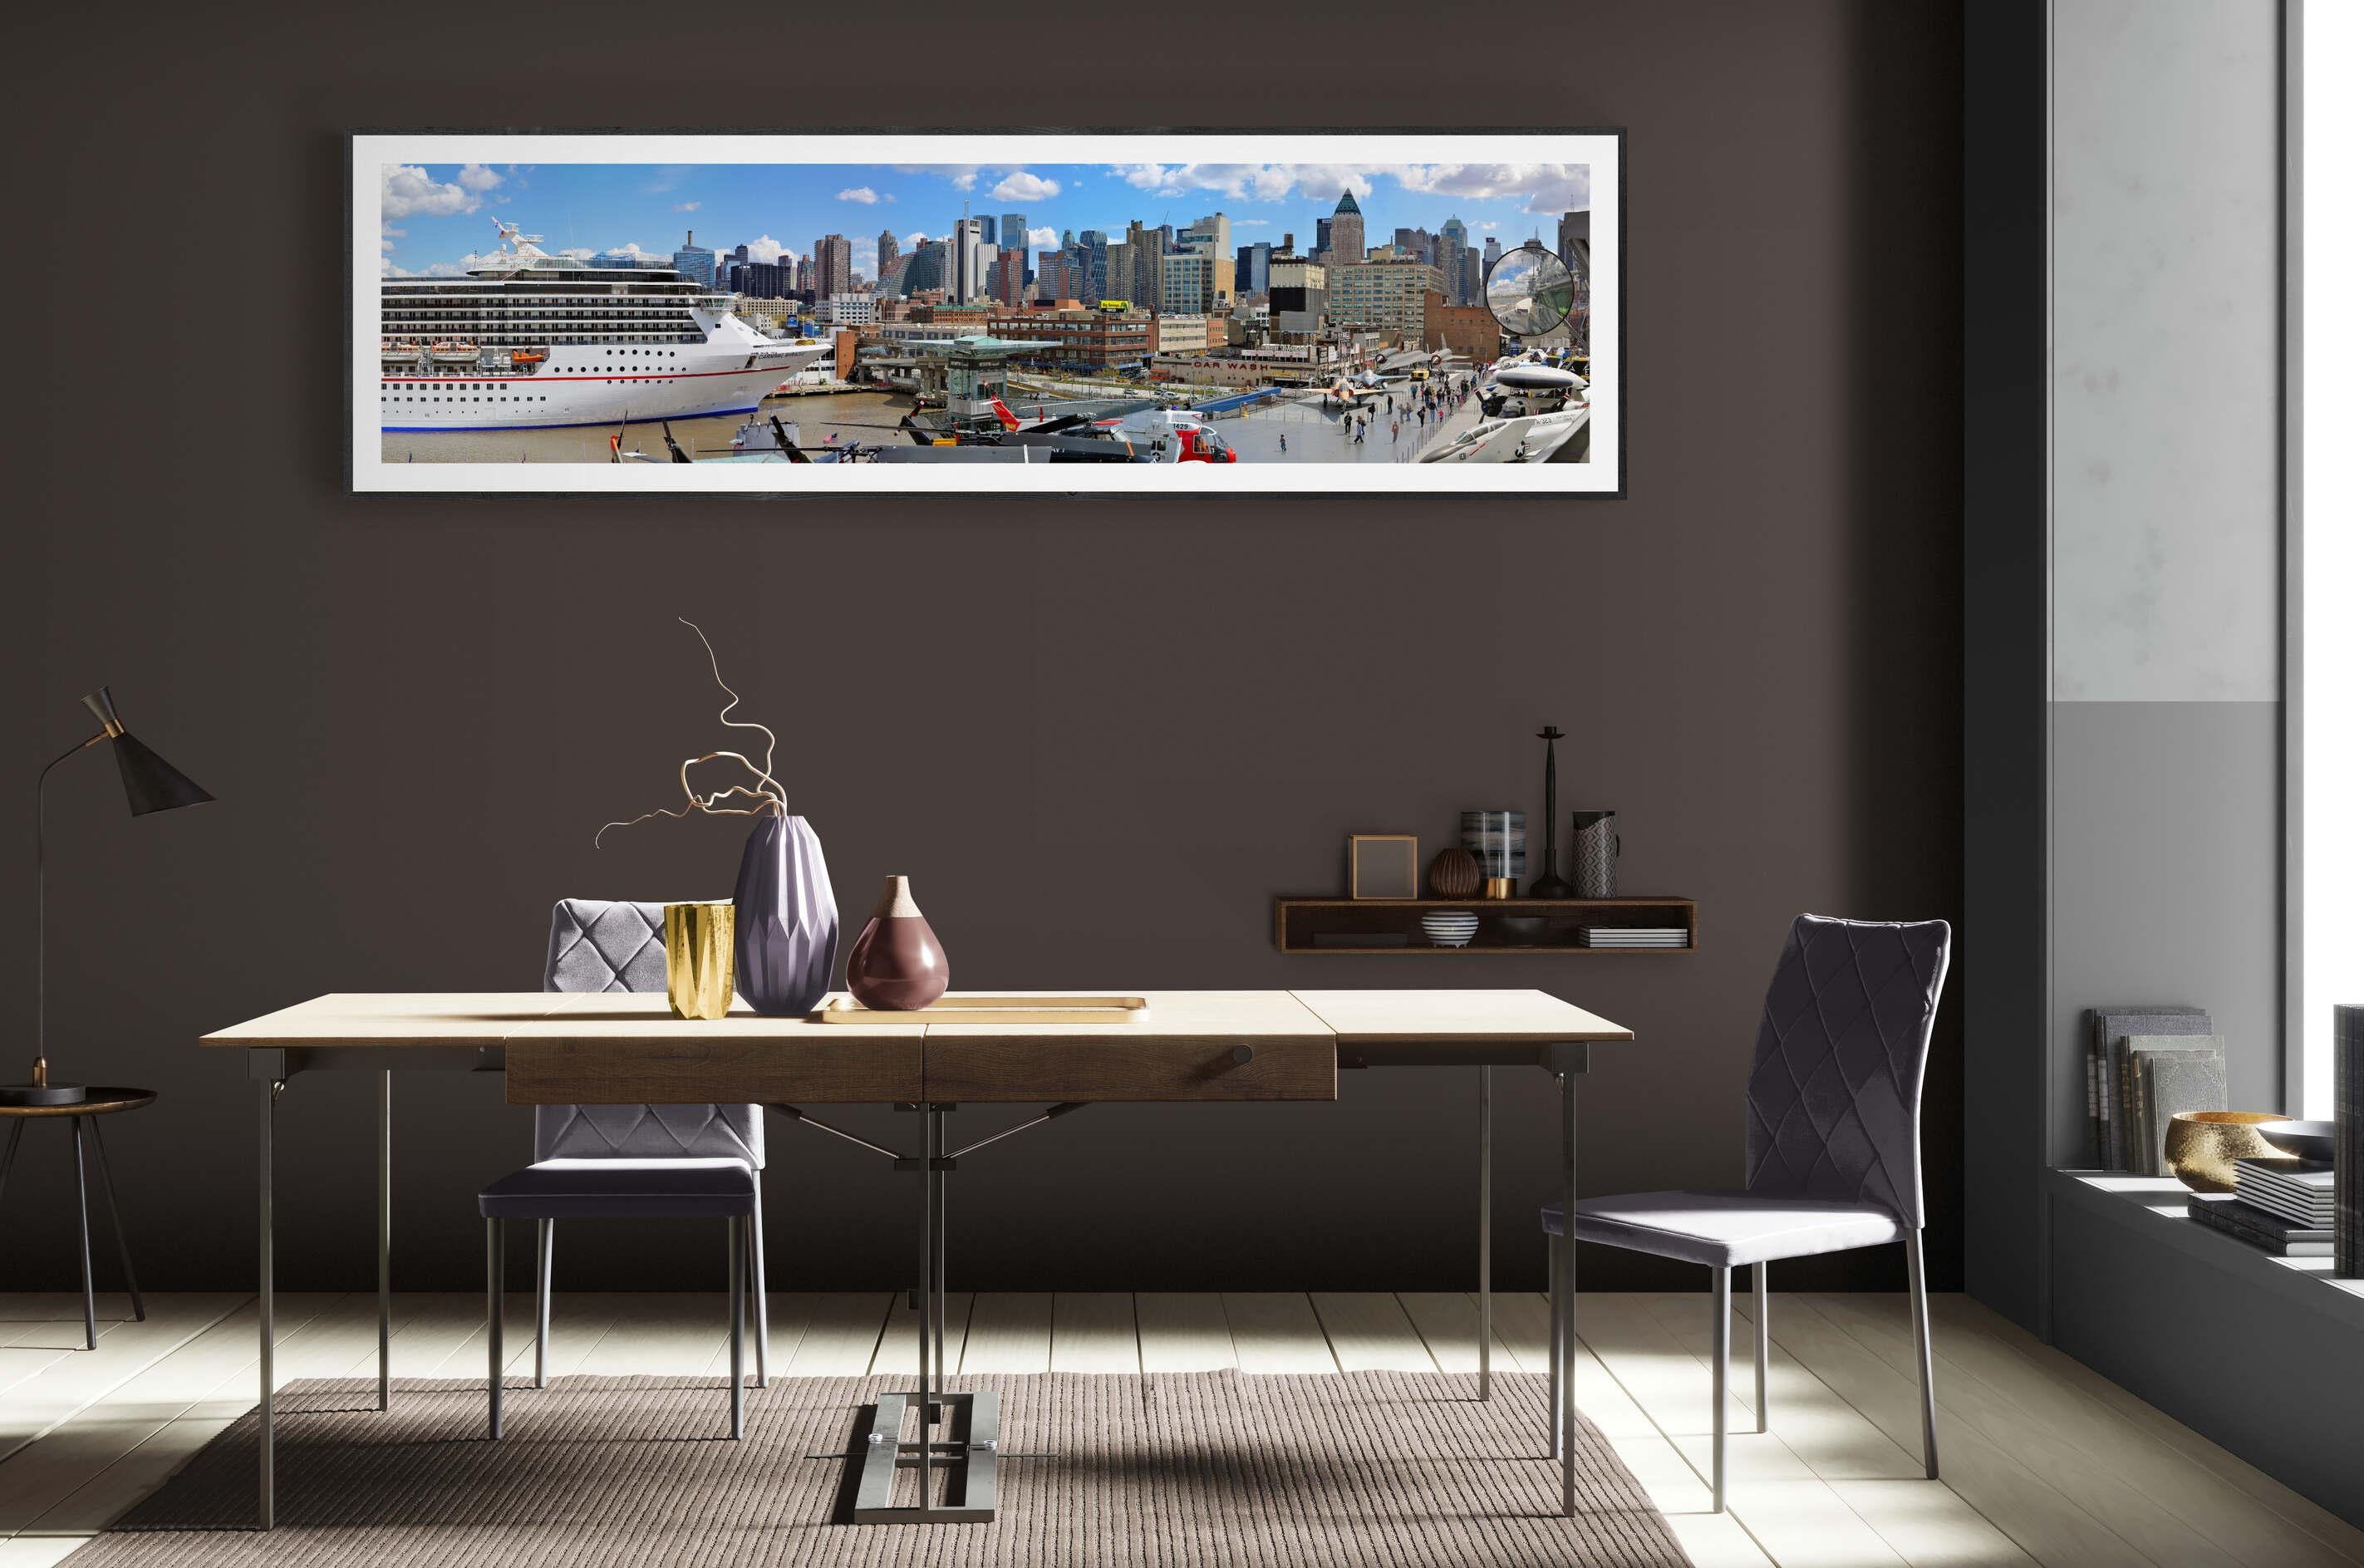 Skyline from the Intrepid museum, NYC - Contemporary Panoramic Color Photography For Sale 2